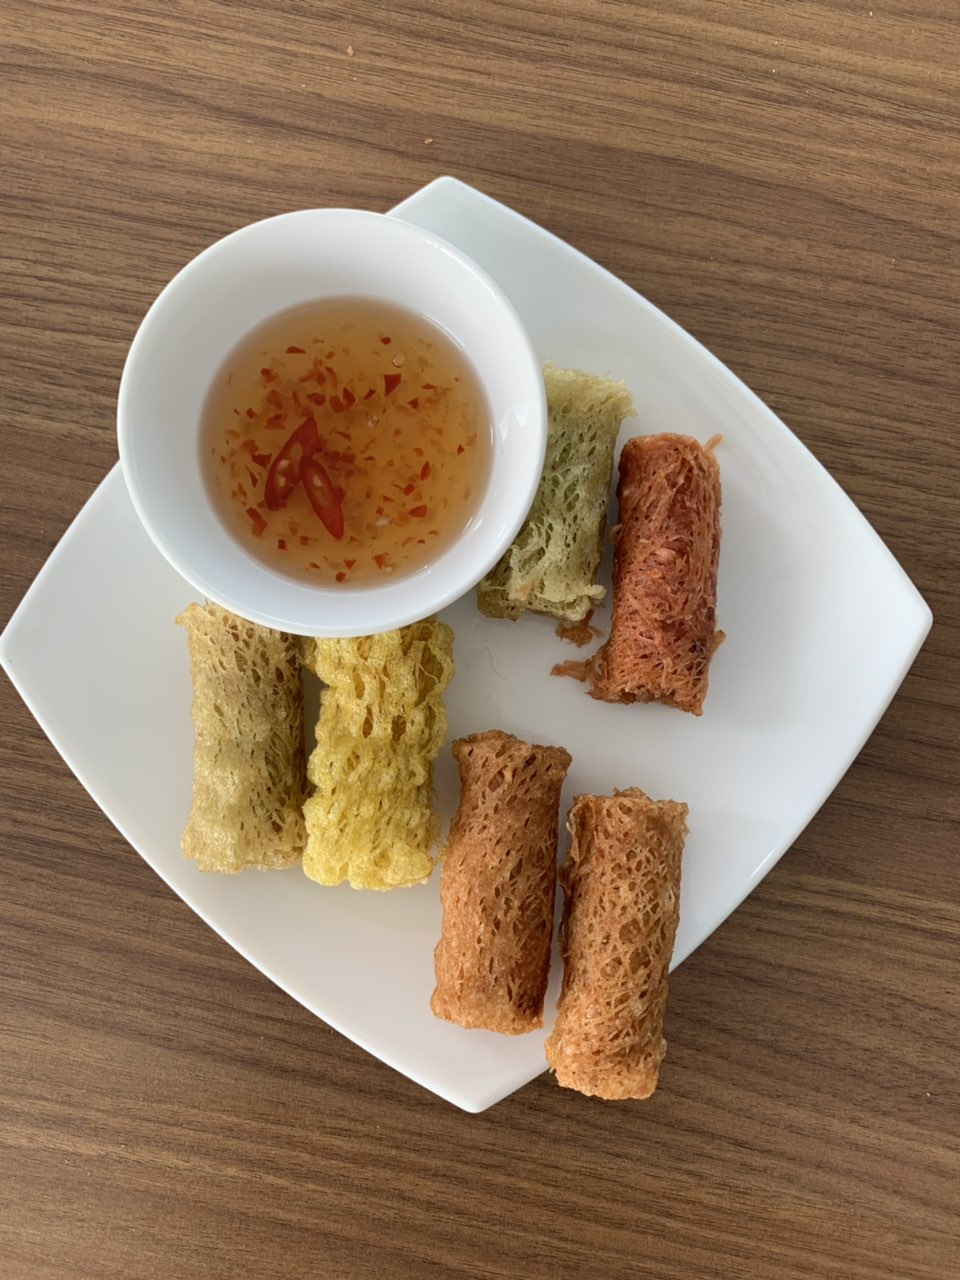 Natural Coloured Net Spring Rolls, Variety